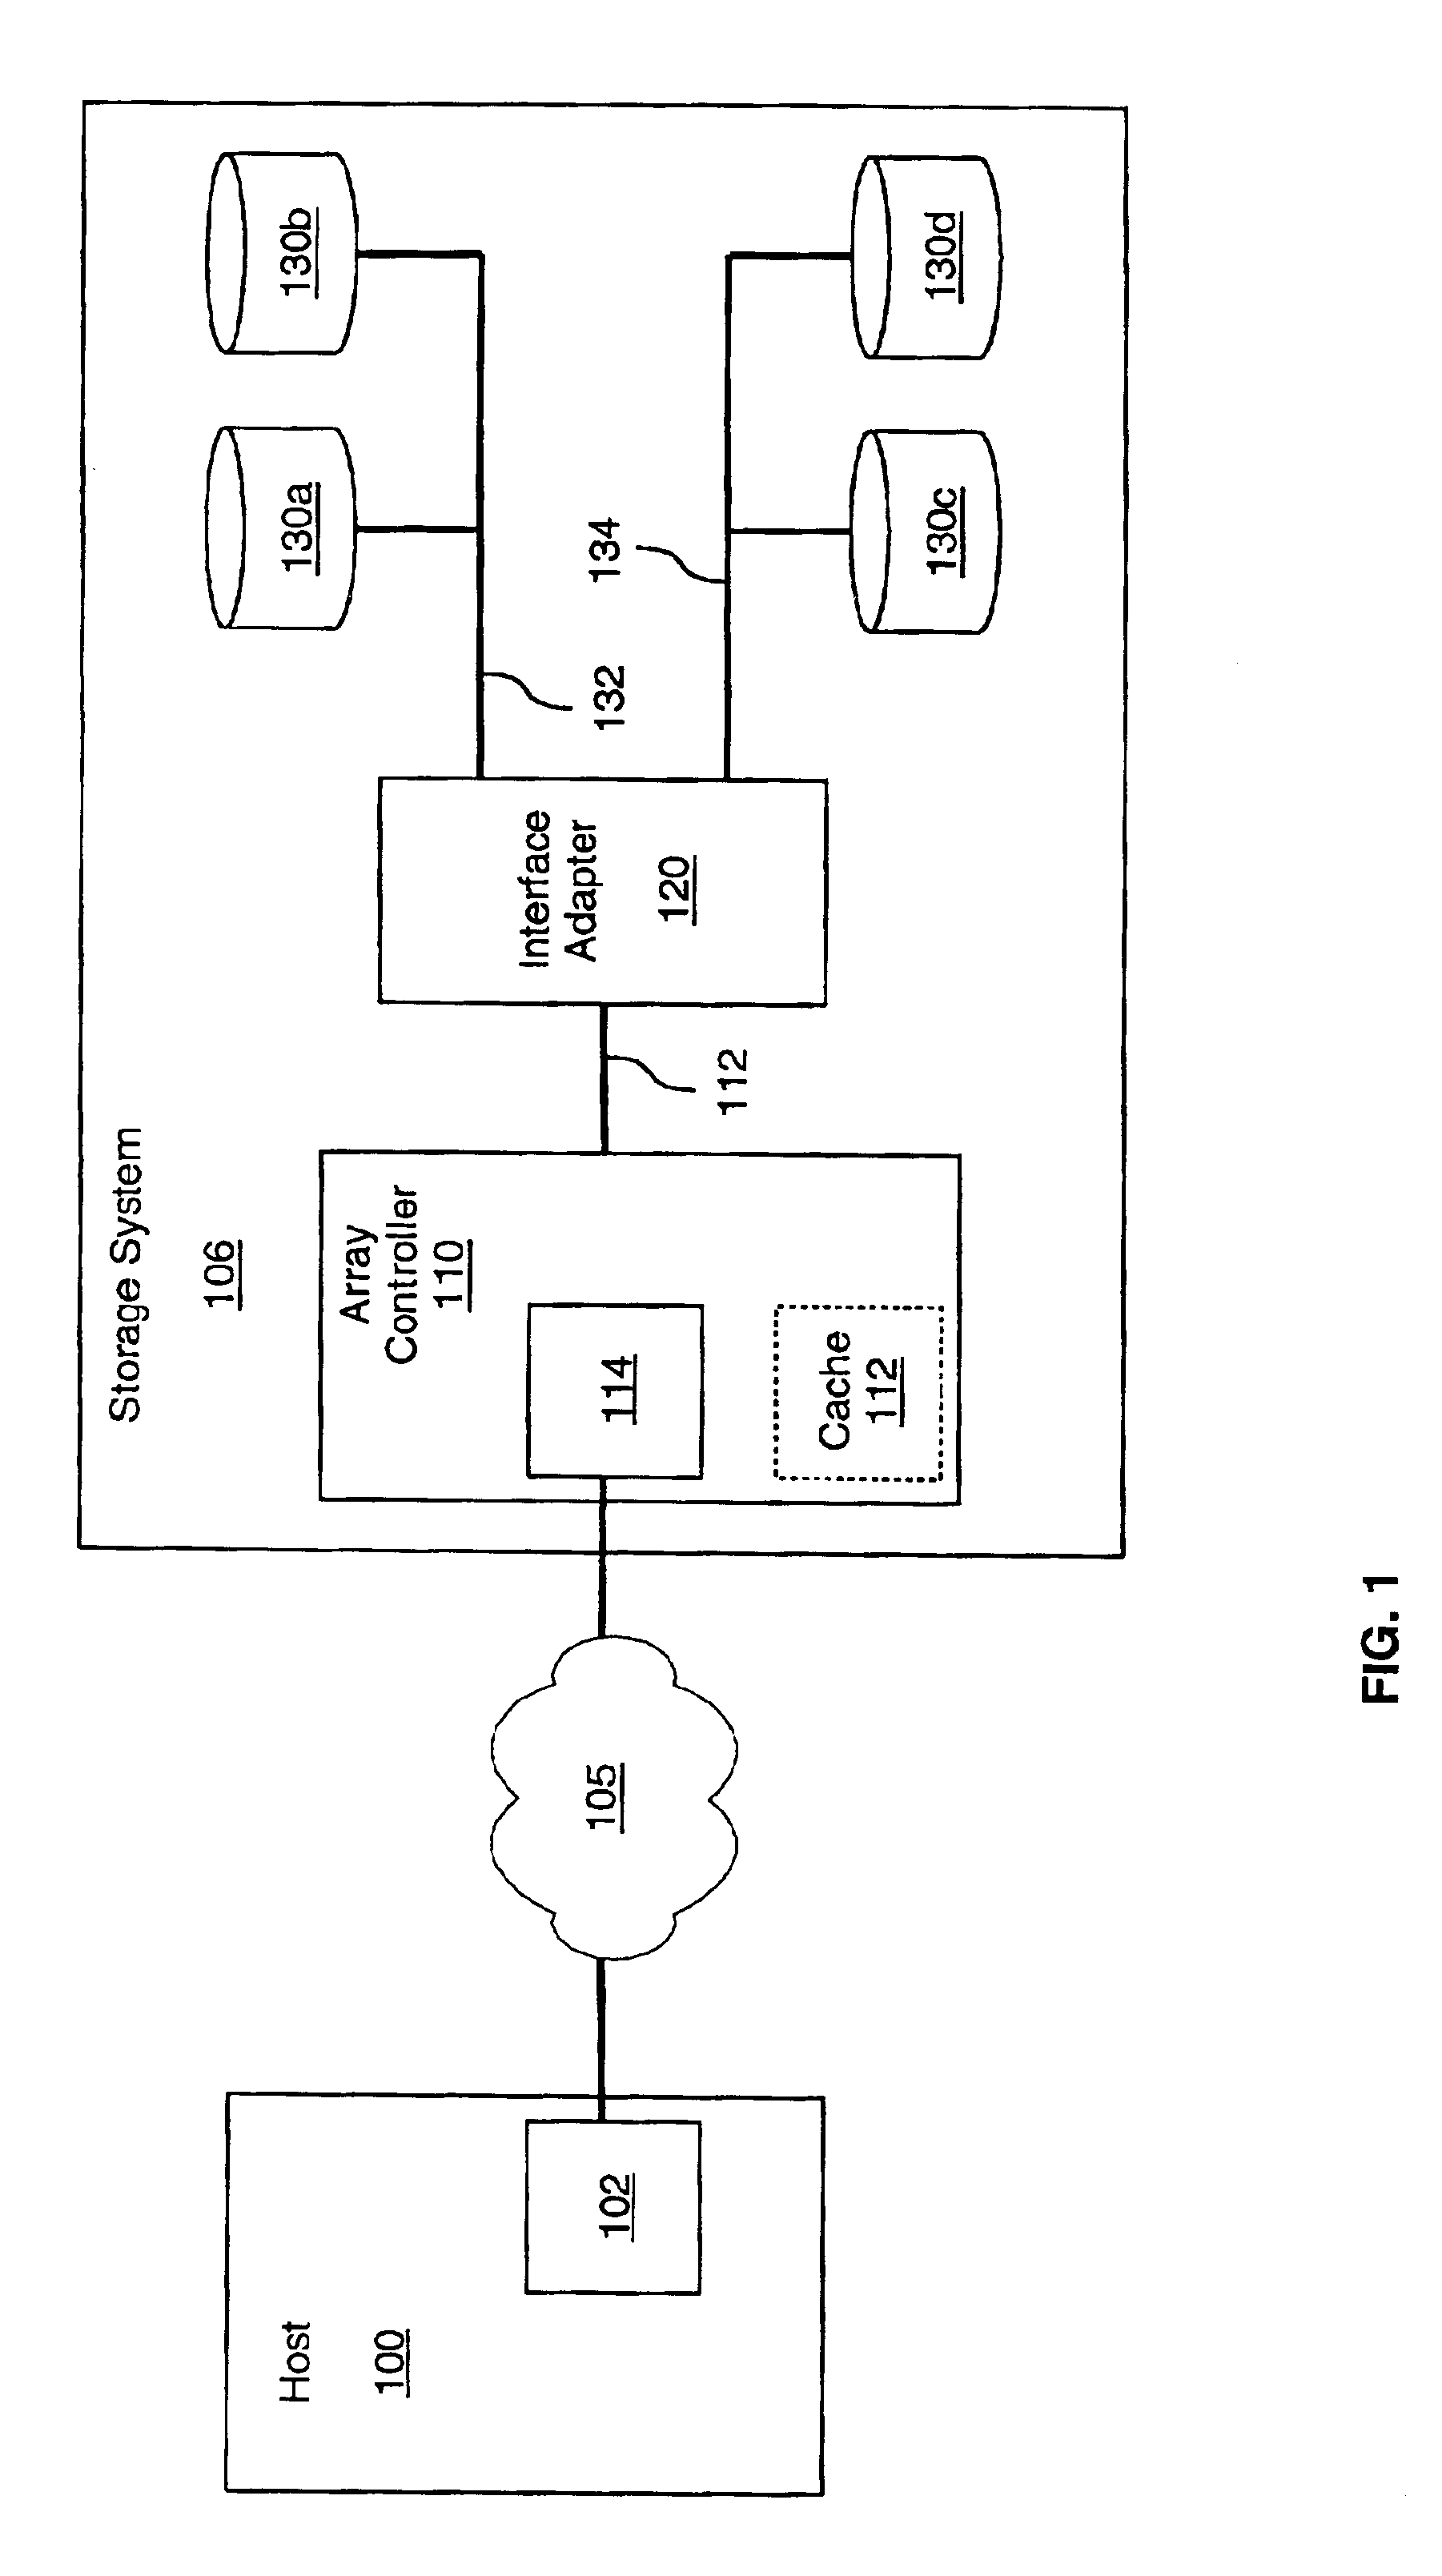 Interface emulation for storage devices